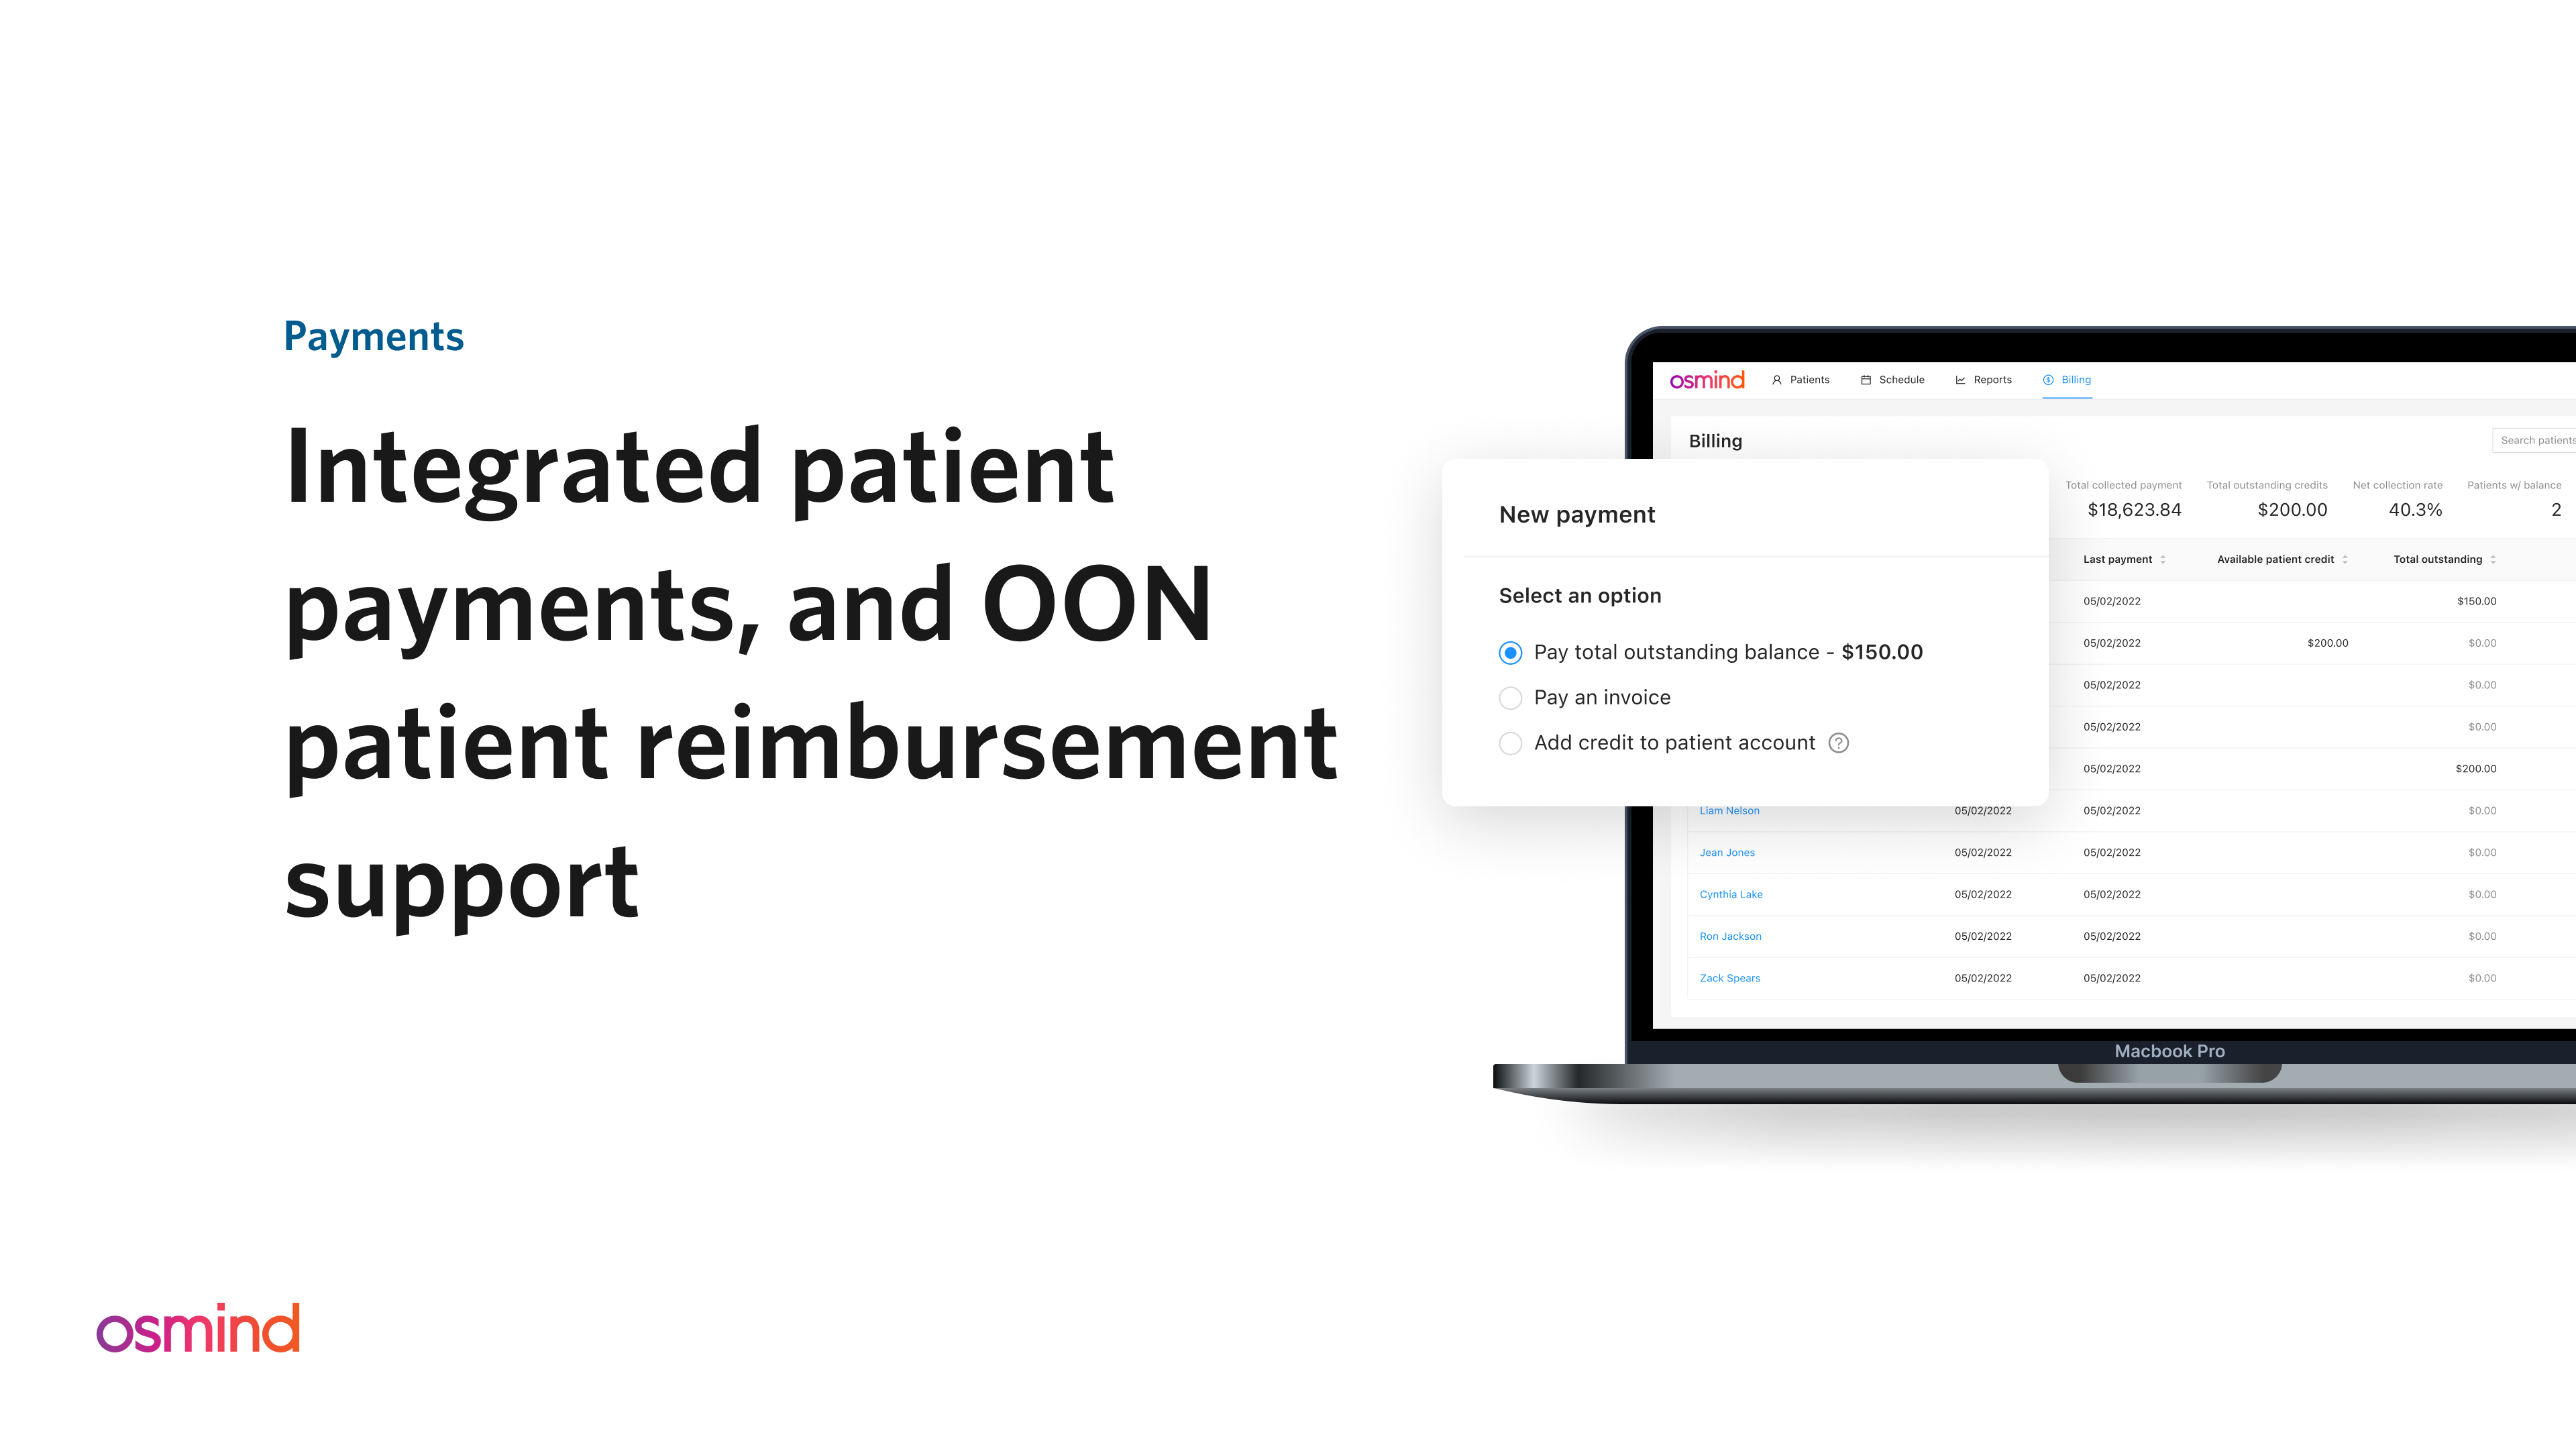 Collect credit card payments at a competitive rate. Generate superbills for your patients to submit for reimbursement—directly through the Osmind app.